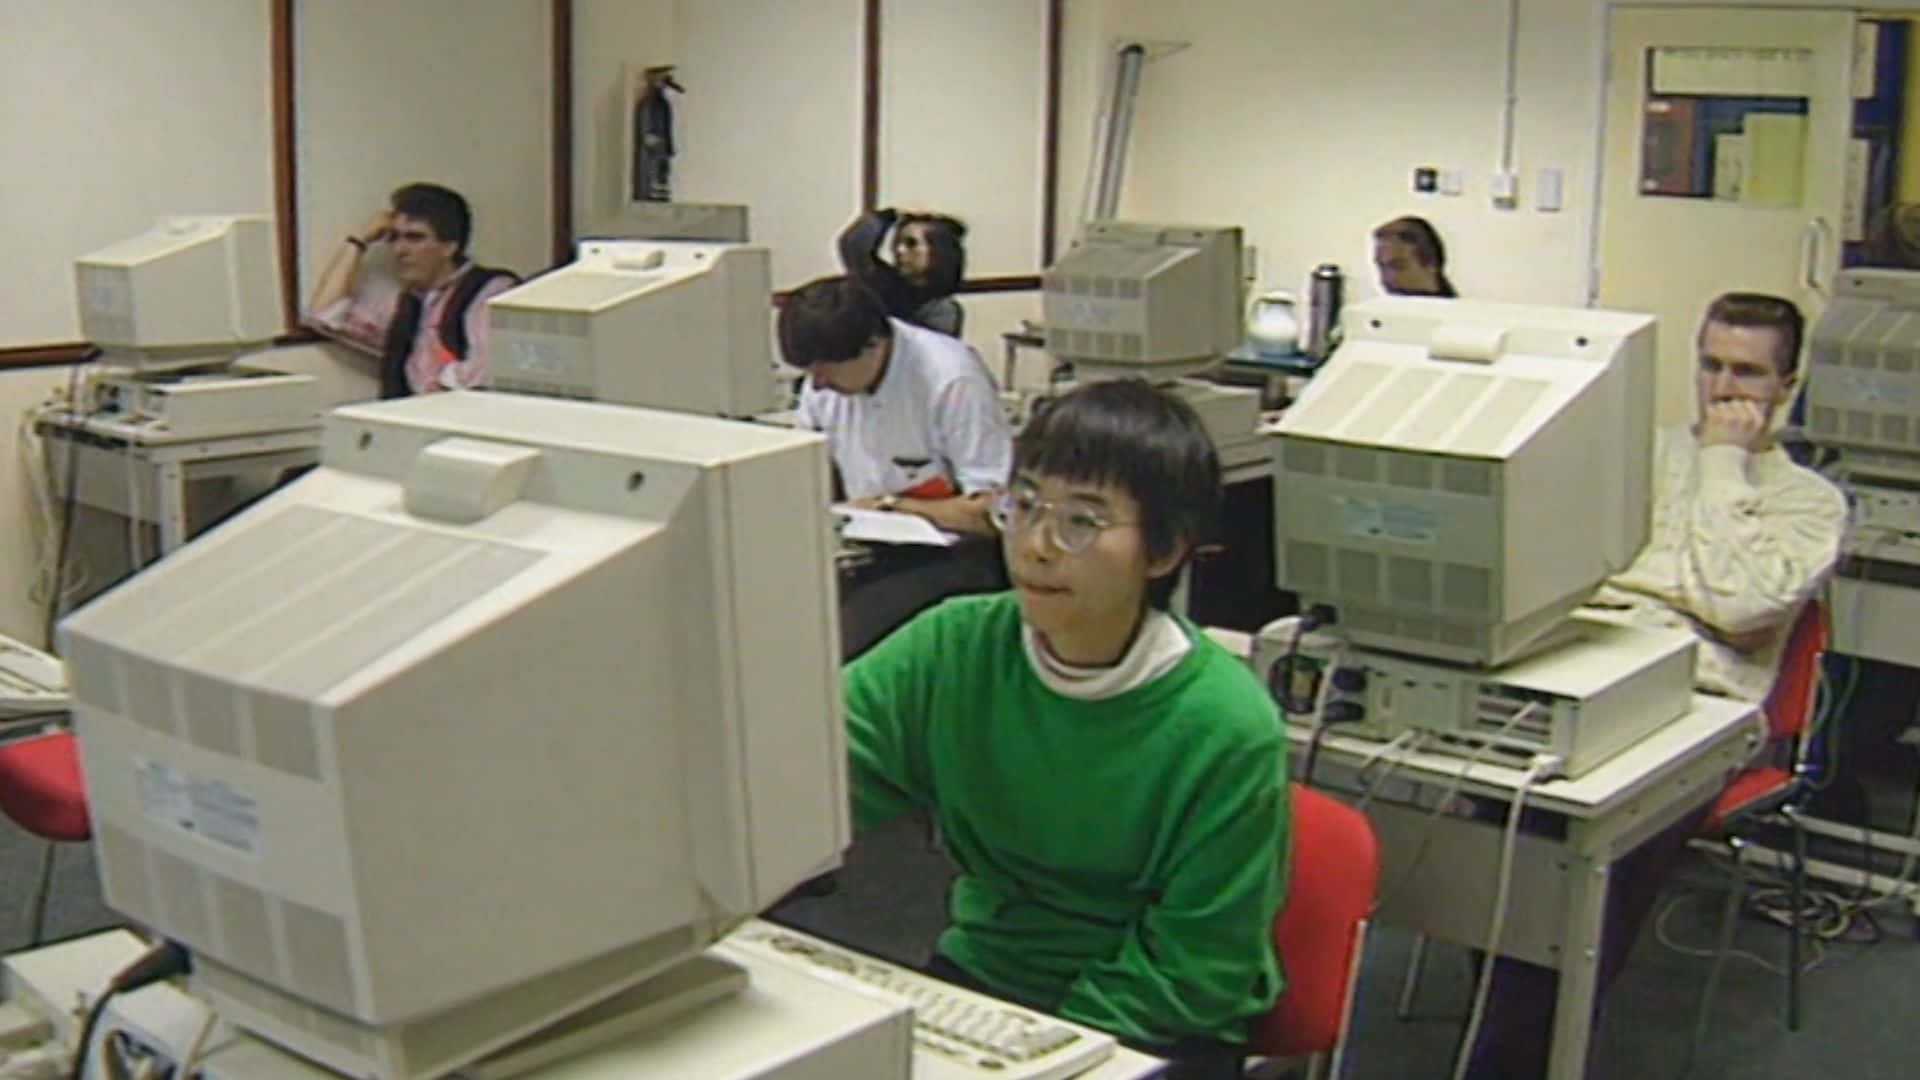 A Group Of People Sitting In Front Of Computers Wallpaper